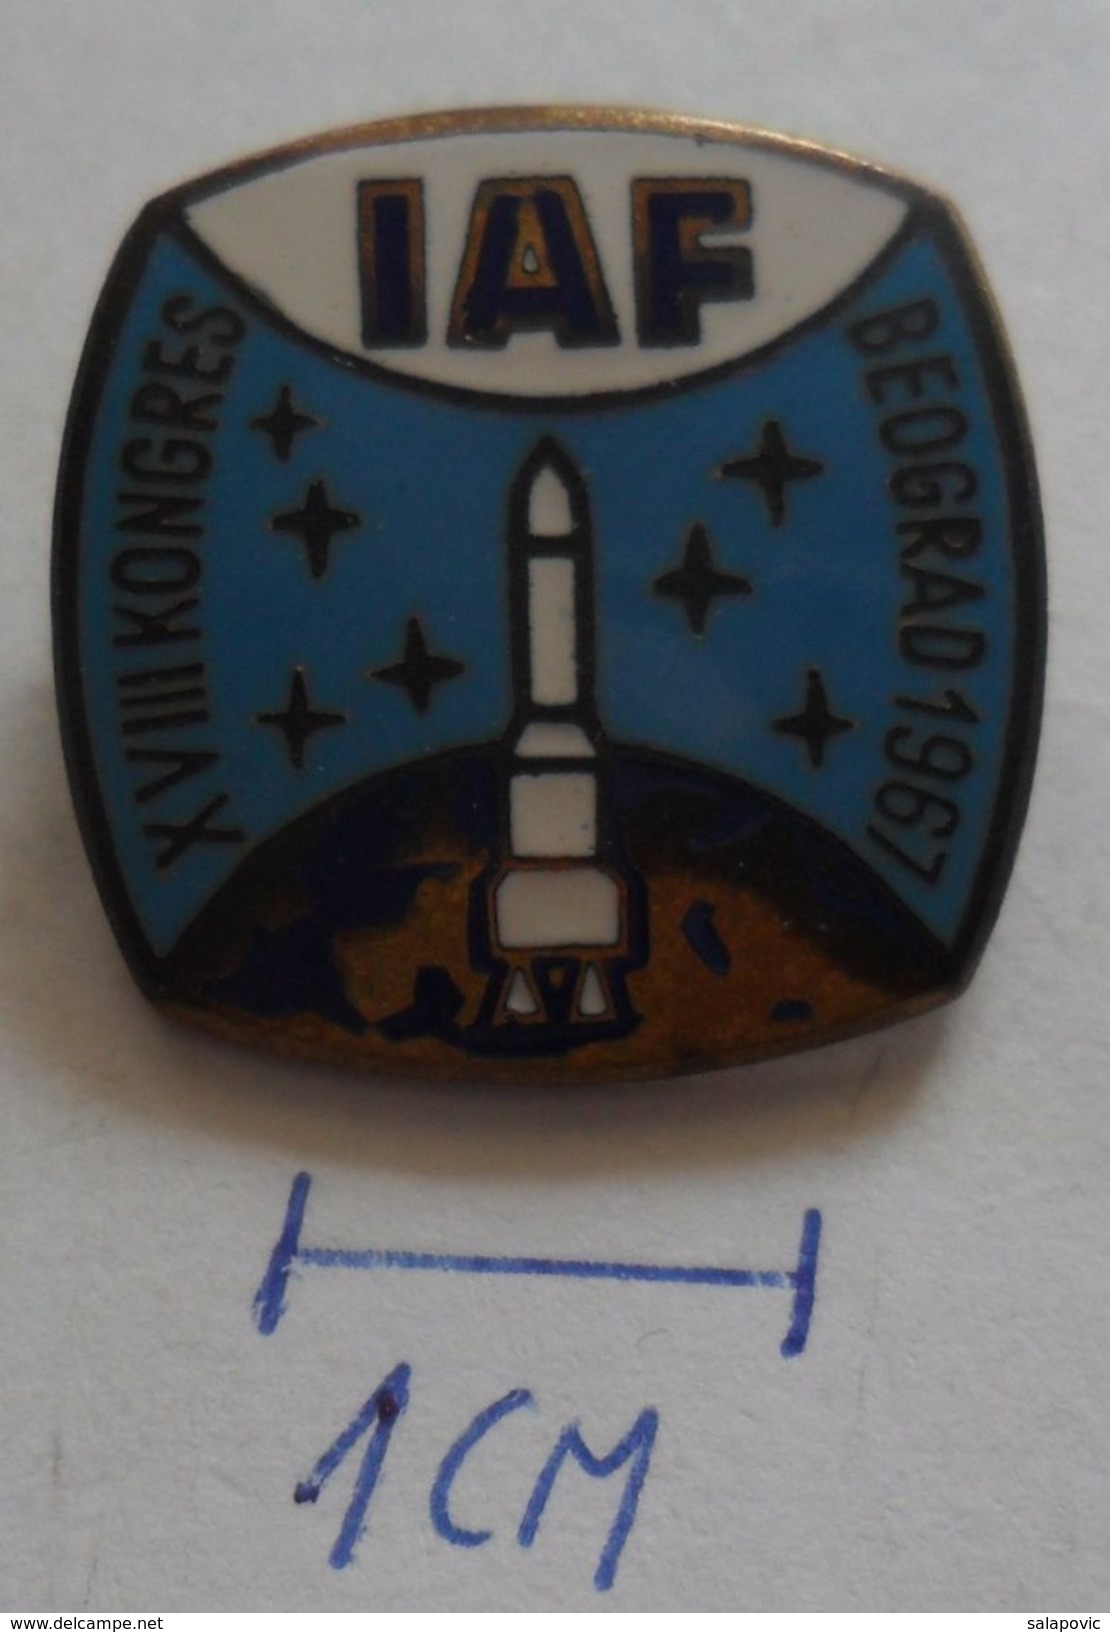 SPACE - IAF - International Astronautic Federation, Beograd, Year 1967  PINS BADGES Z3 - Space